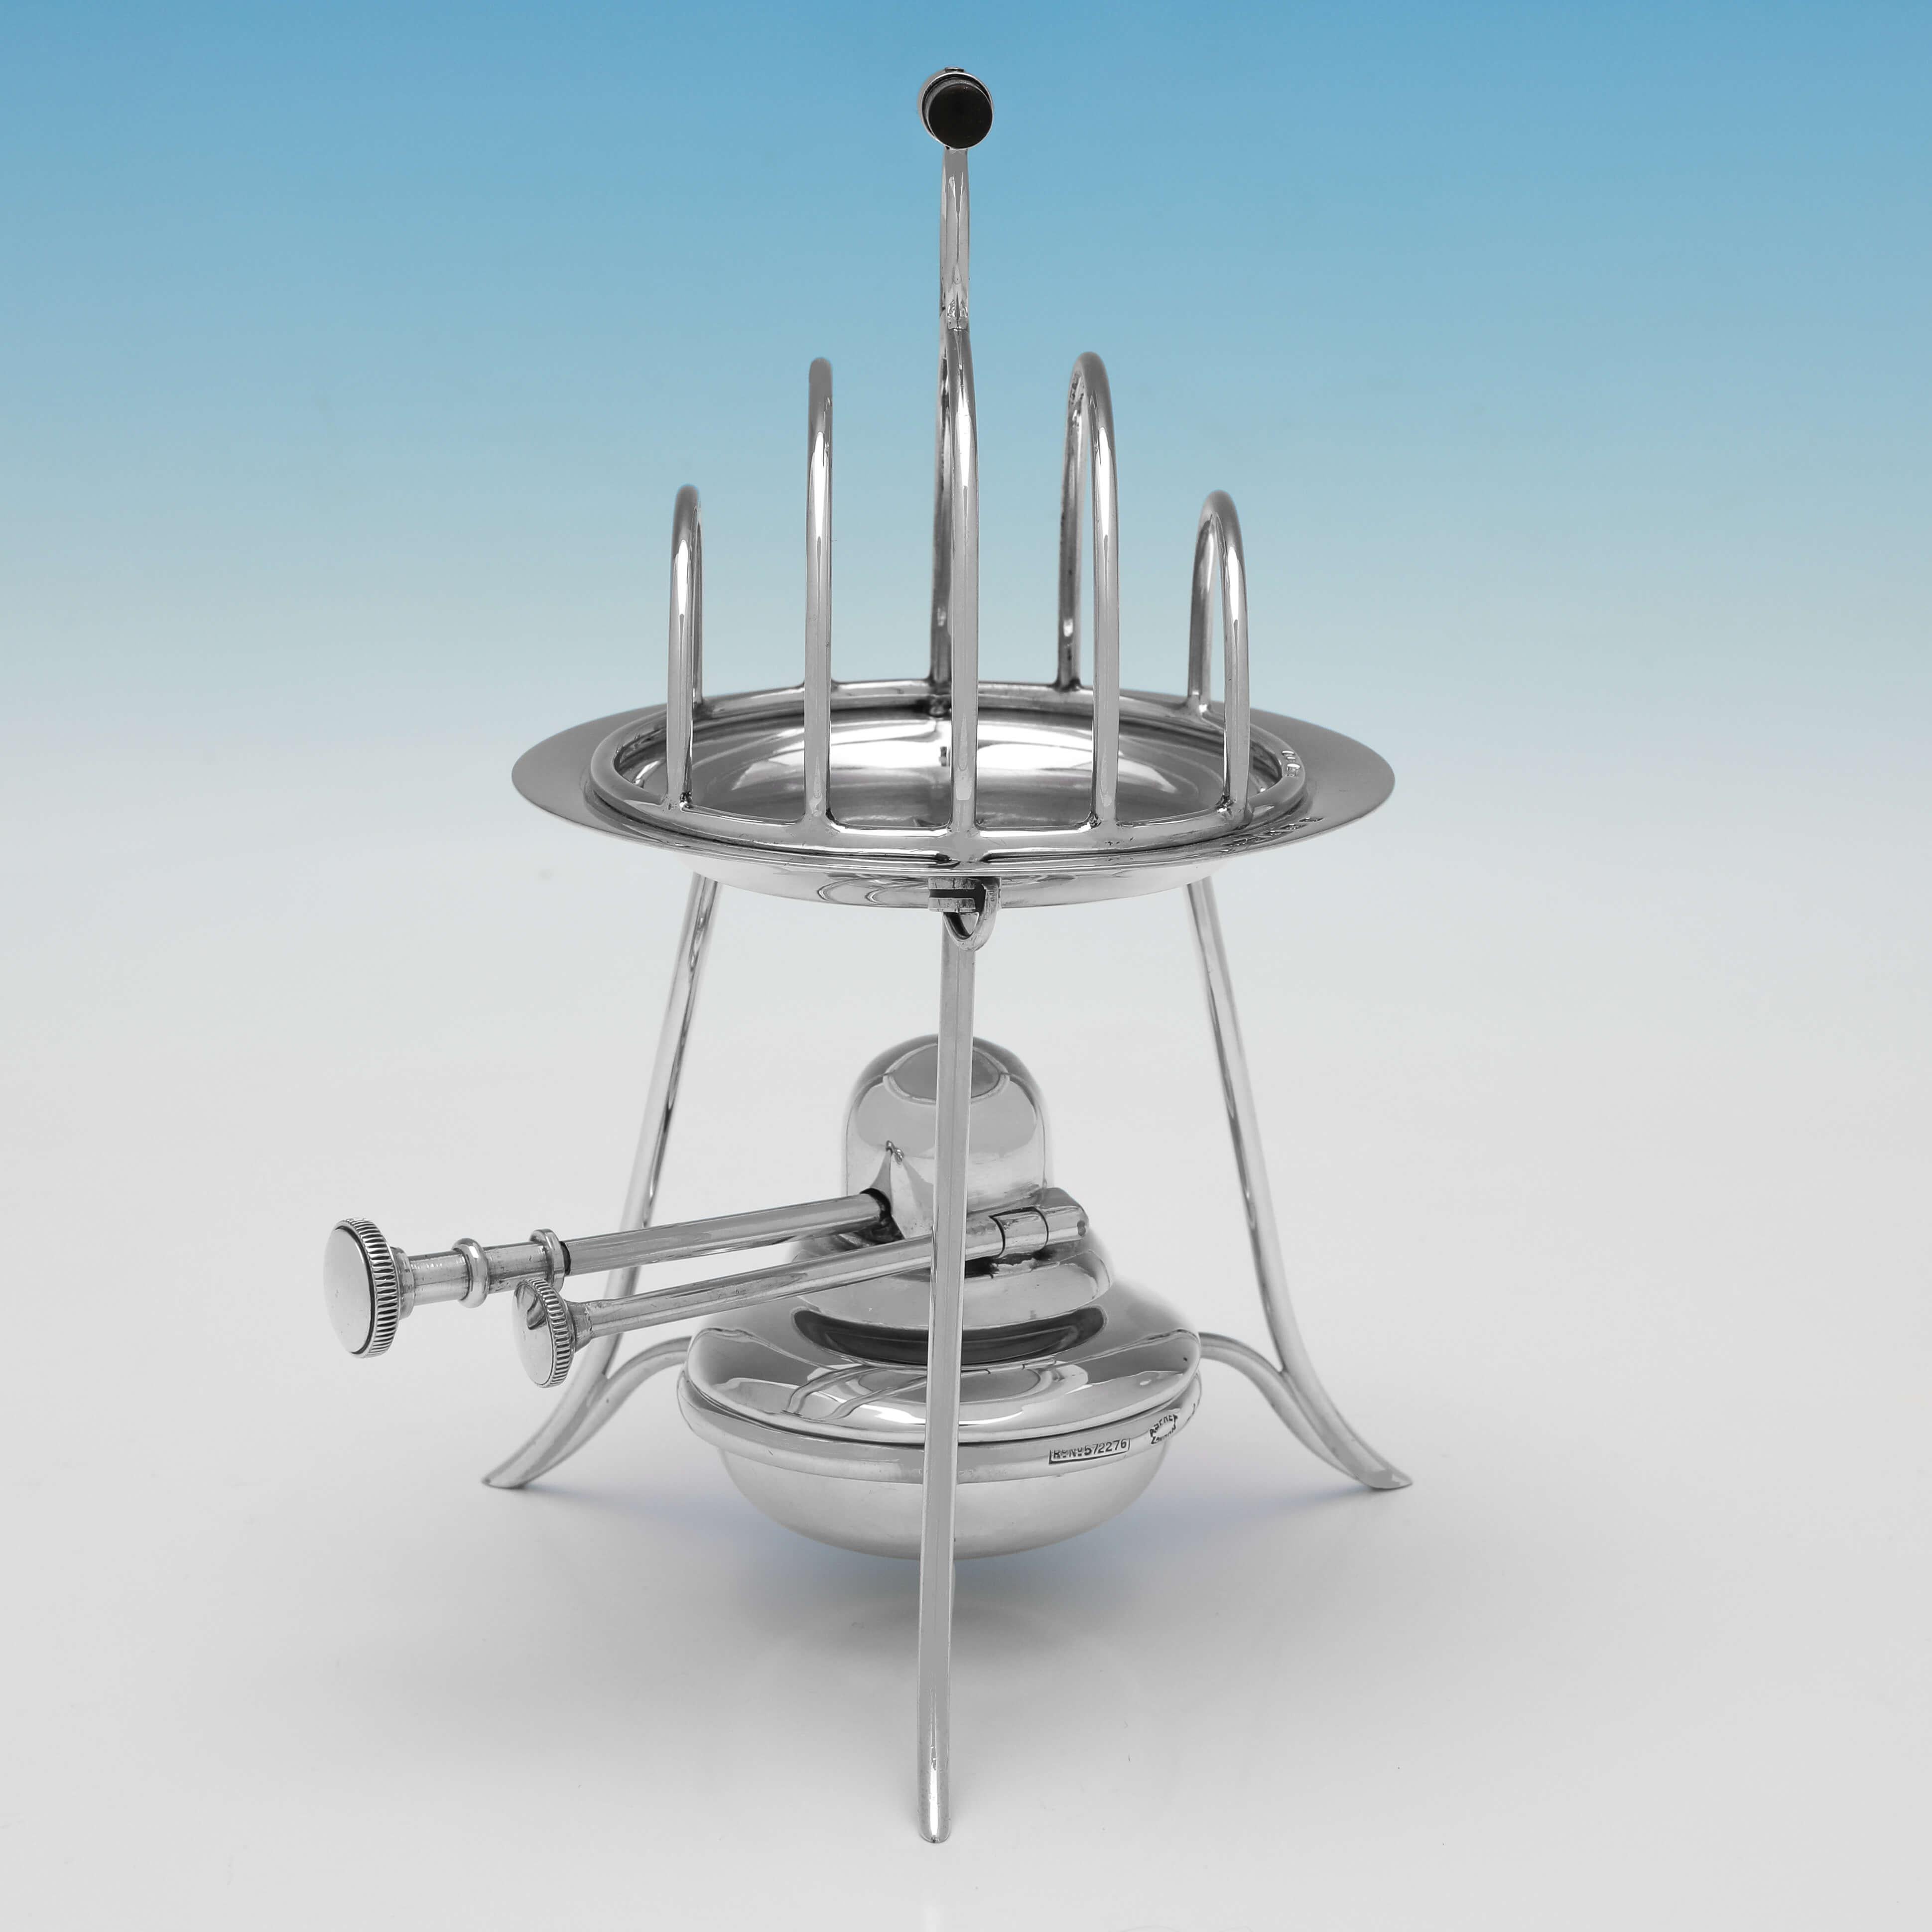 Hallmarked in Birmingham in 1912 by Asprey & Co. Ltd., this stylish, Antique Sterling Silver Toast Rack, will hold 4 slices of toast, and sits on top of a removable aluminium heater plate which sits above a spirit burner. 

The heated toast rack